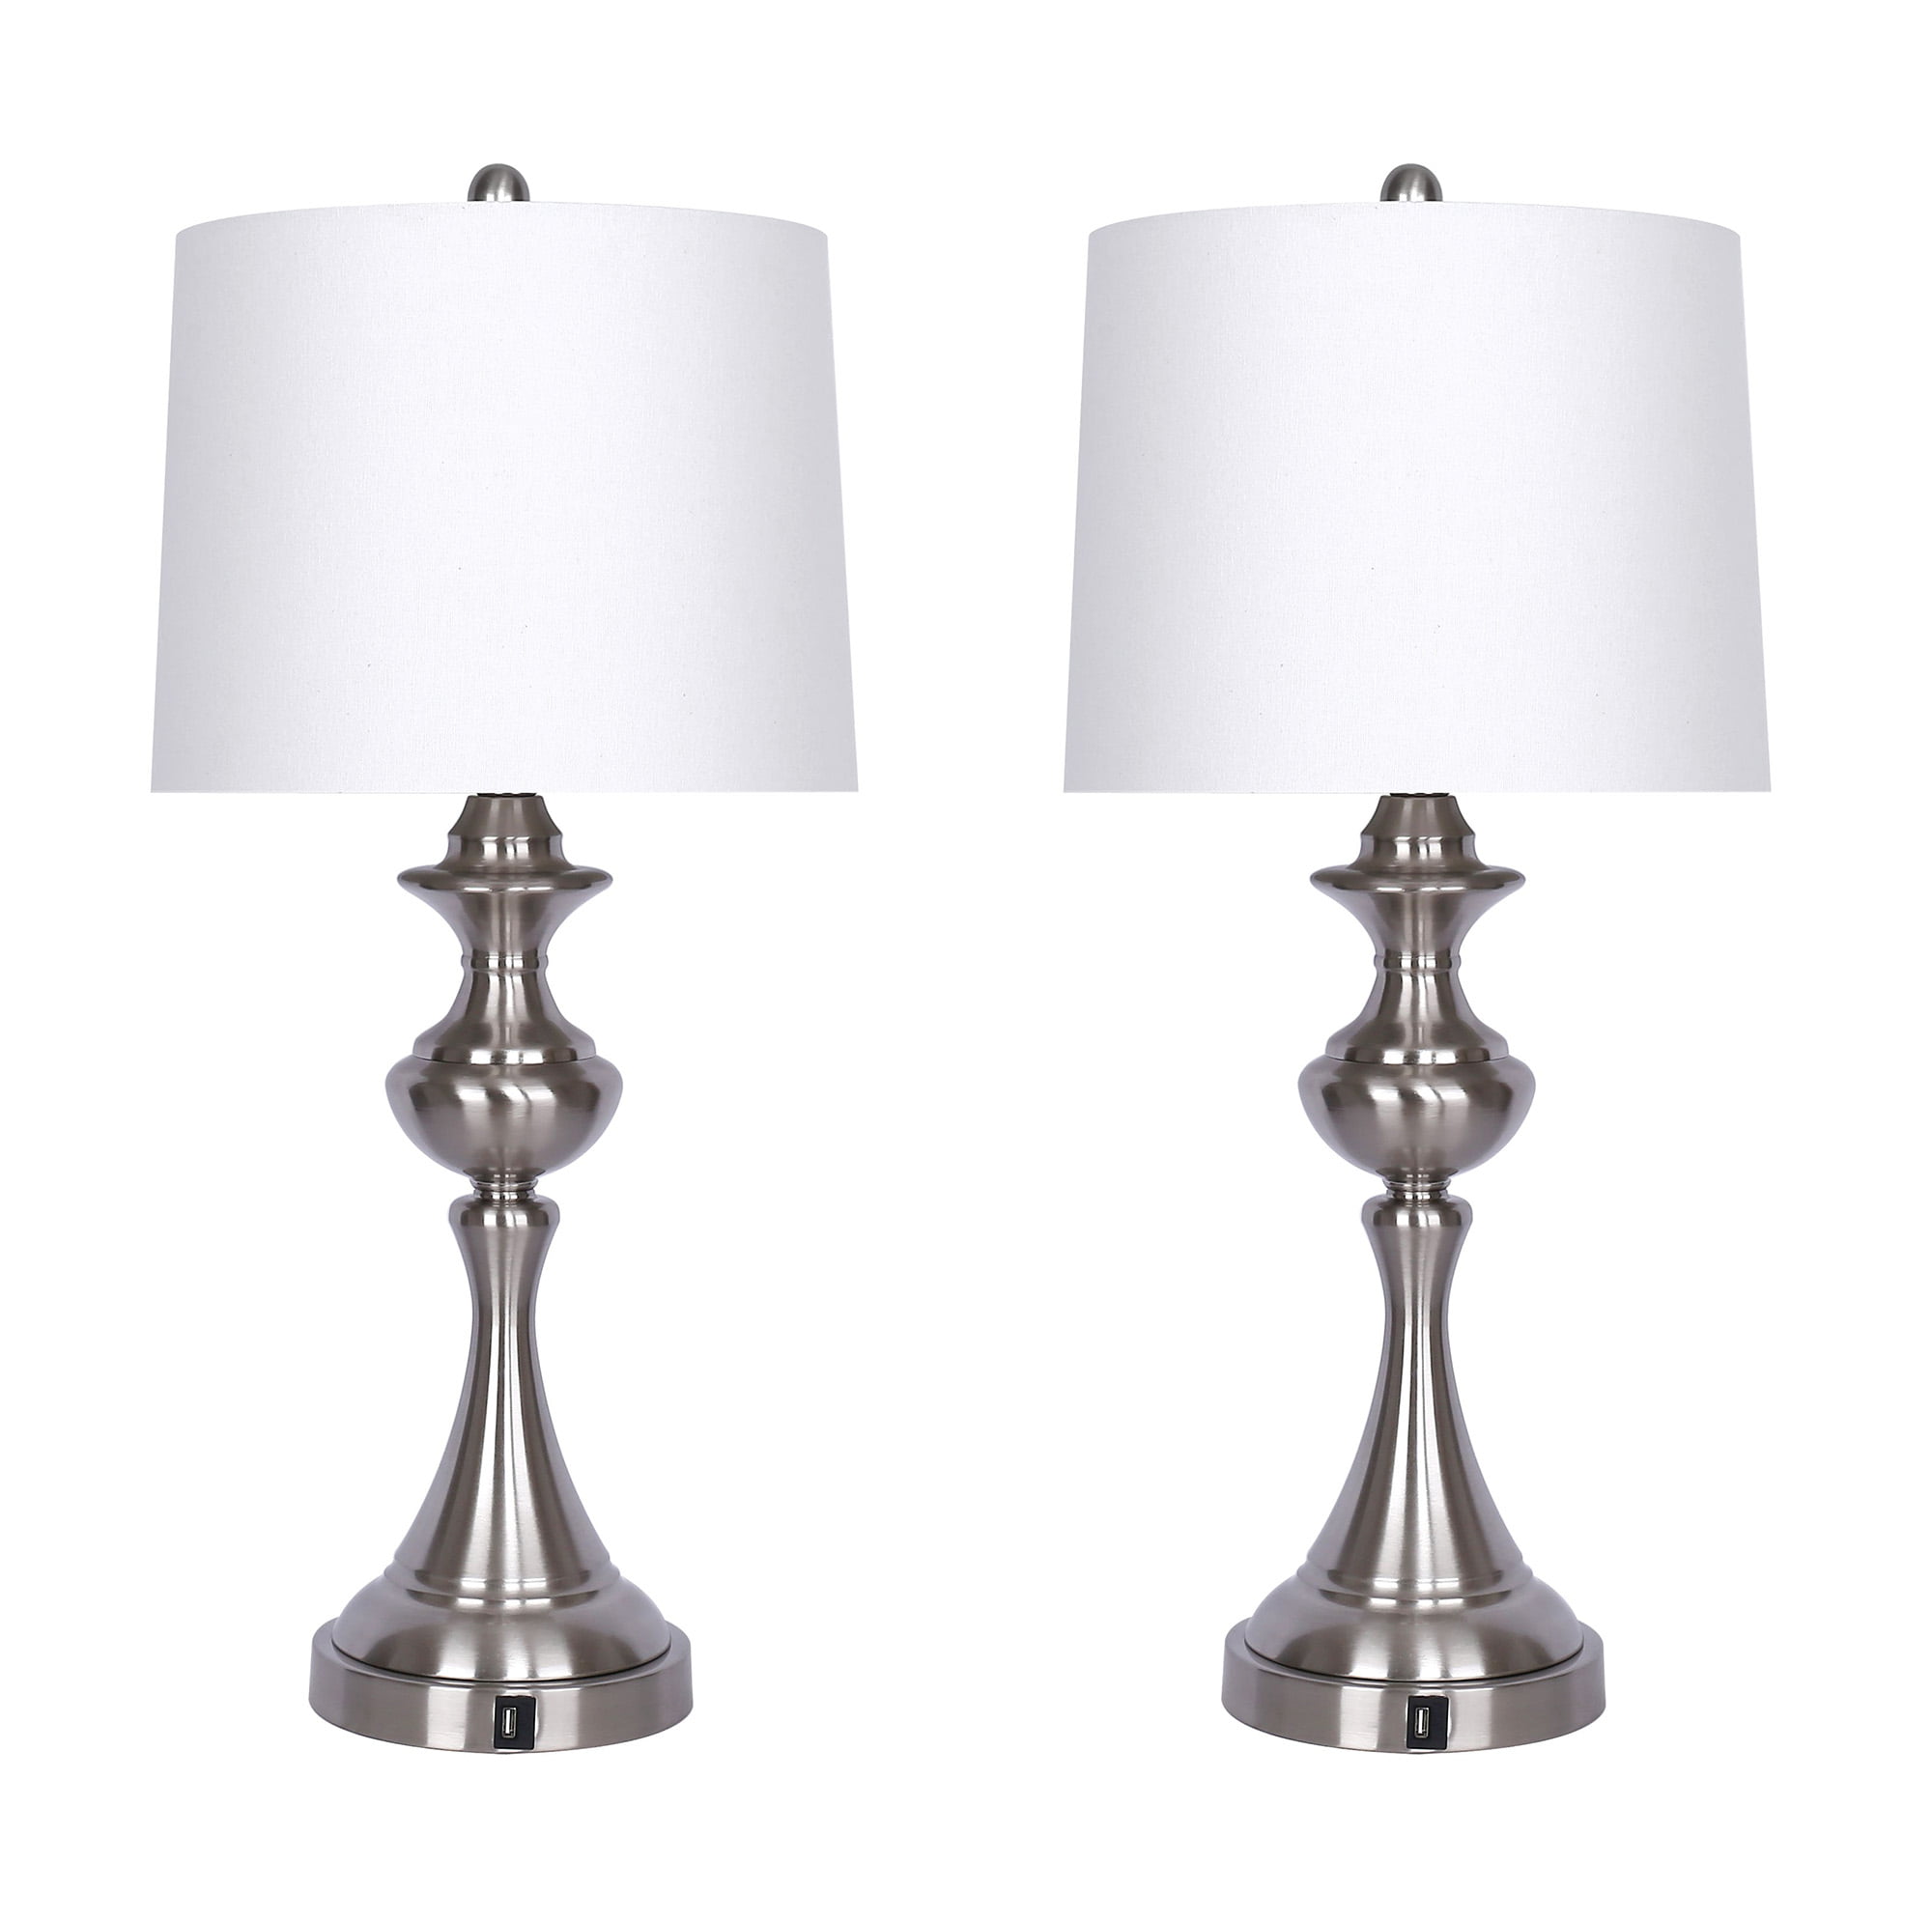 Brushed Nickel 28 5 Table Lamp Set Of, Brushed Nickel Table Lamp With White Shade